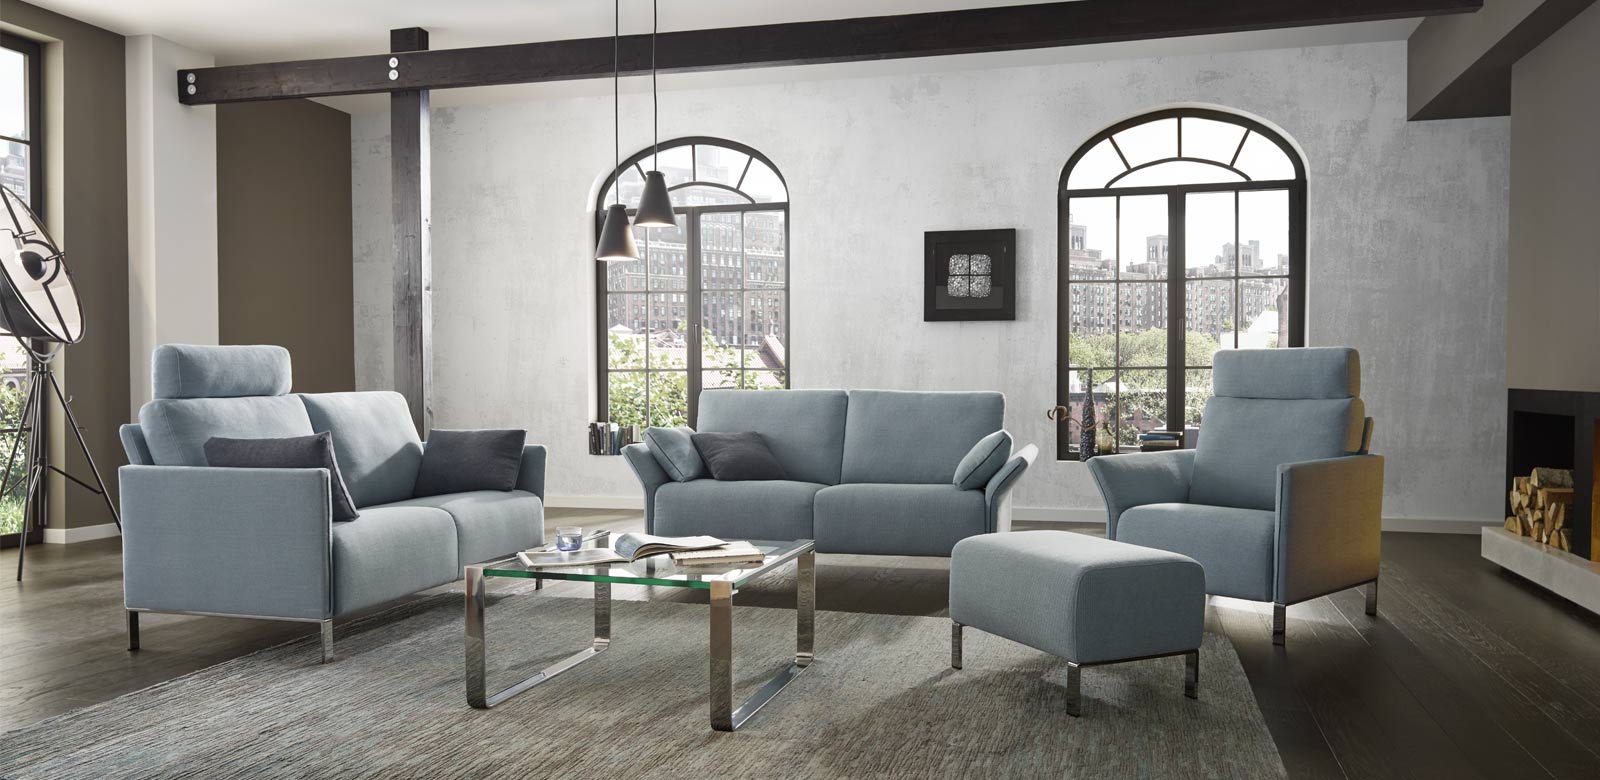 Cool special Scandic look paired with refined and beautiful details gives the noble sofa its special charisma. Whether in fabric or leather, an exclusive sofa like Modena is a real eye-catcher as a 2- or 3-seater with stool or single armchair. The narrow armrests can be angled up to 72° and thus adjusted as required. A contrasting decorative seam on the front of the armrests emphasises the slender silhouette. The sofa is optionally available with a headrest.